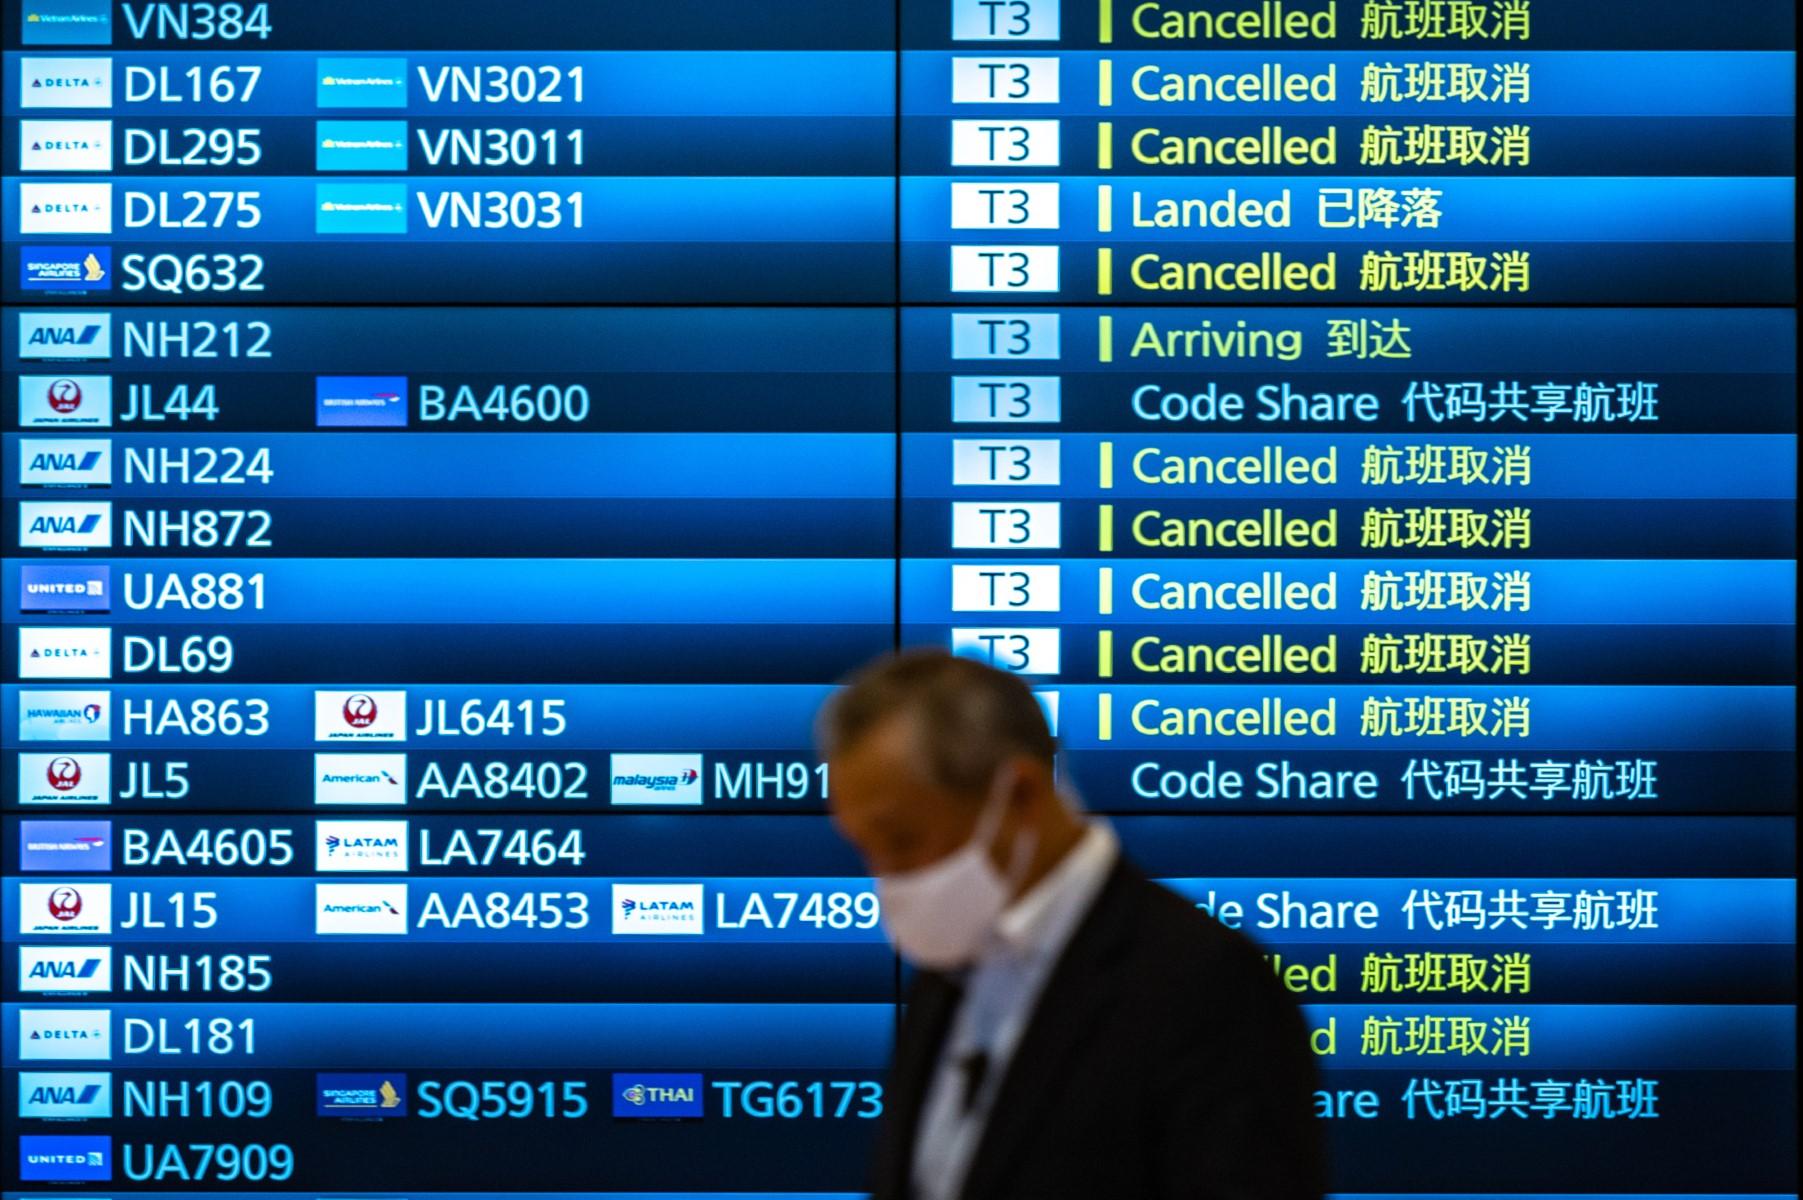 A man walks past an arrivals board showing cancelled flights at Tokyo's Haneda international airport on Nov 30, a day after Japan announced it would reinstate tough border measures, barring all new foreign arrivals over the Omicron Covid variant. Photo: AFP